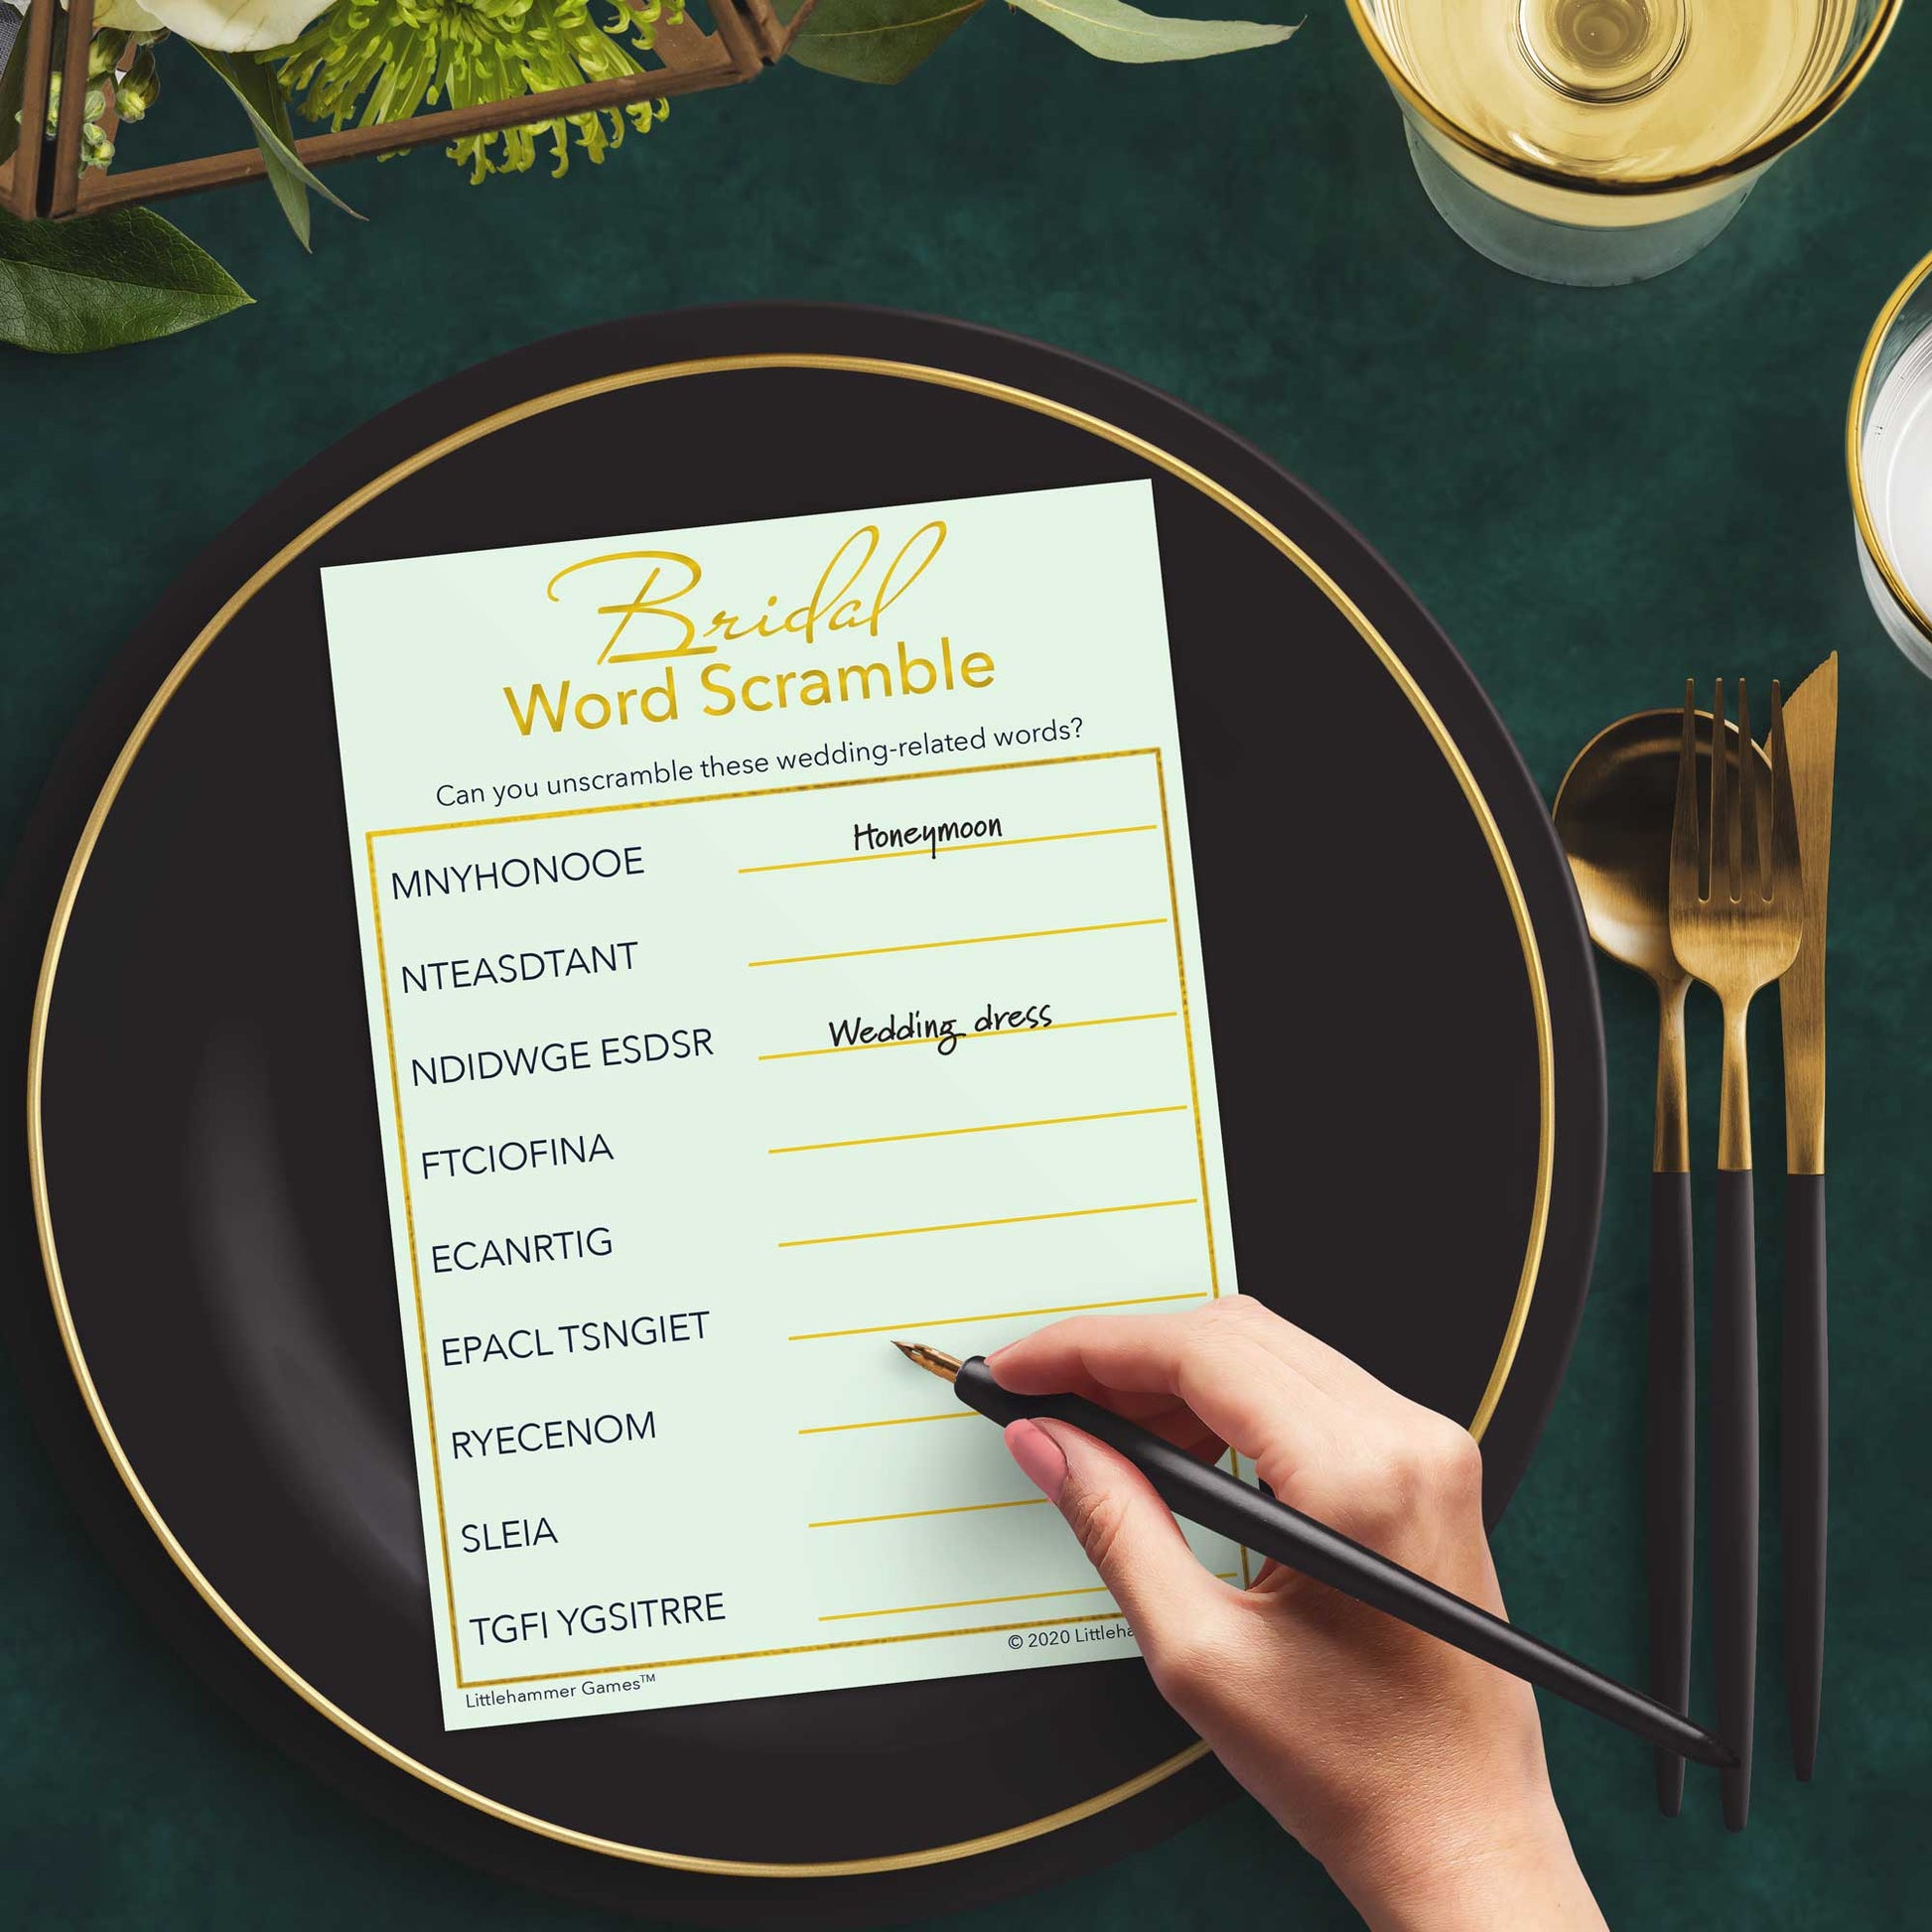 Woman with a pen playing a mint and gold Bridal Word Scramble game card at a dark place setting